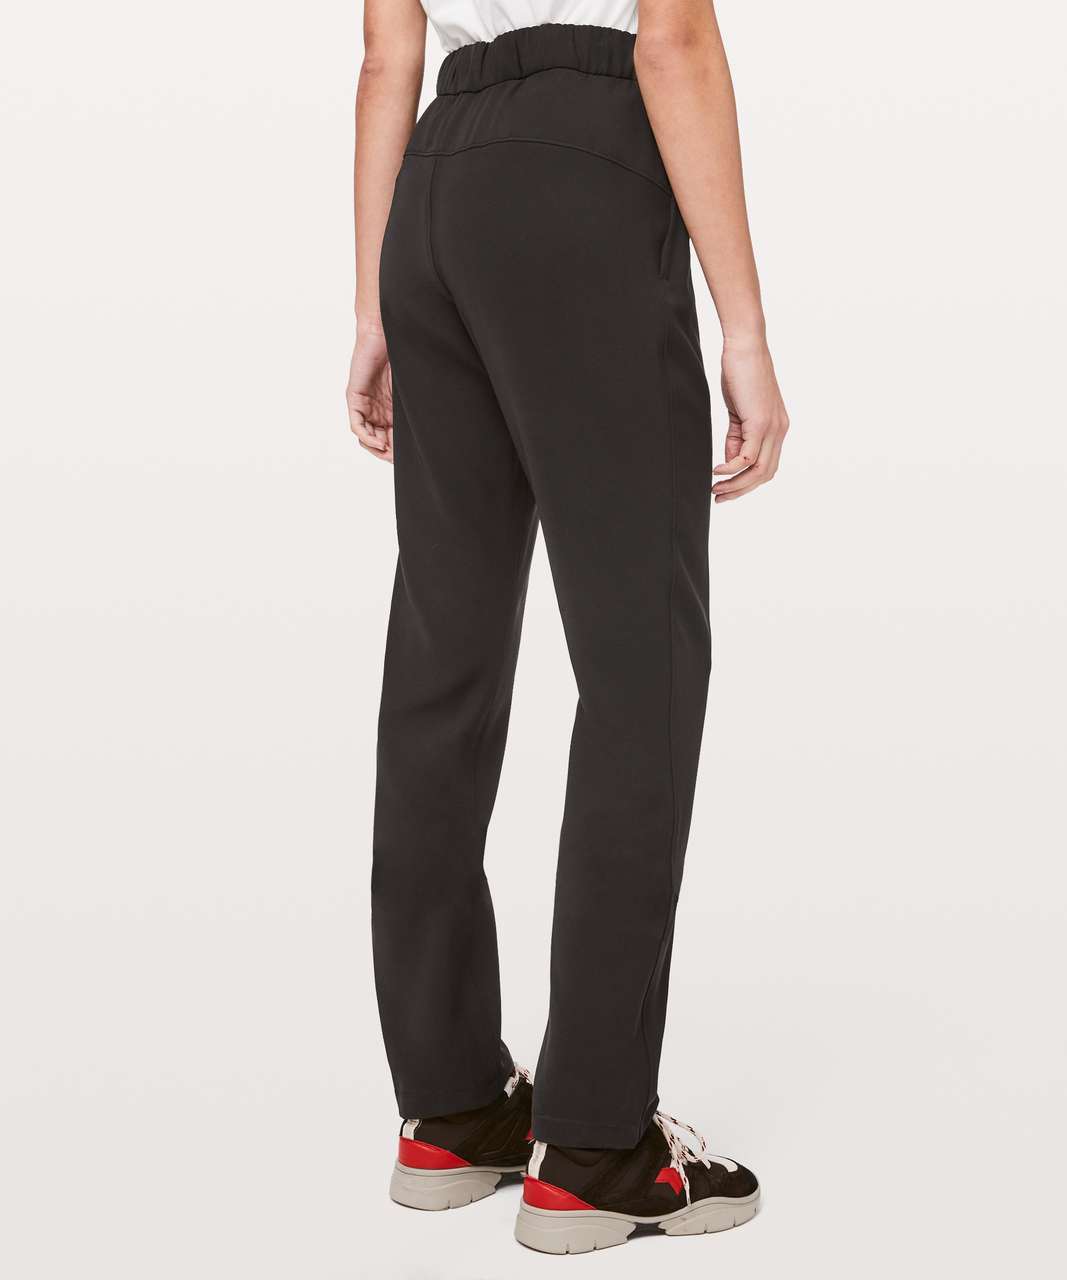 Lululemon On The Fly Pant Woven Tall 33" - Black